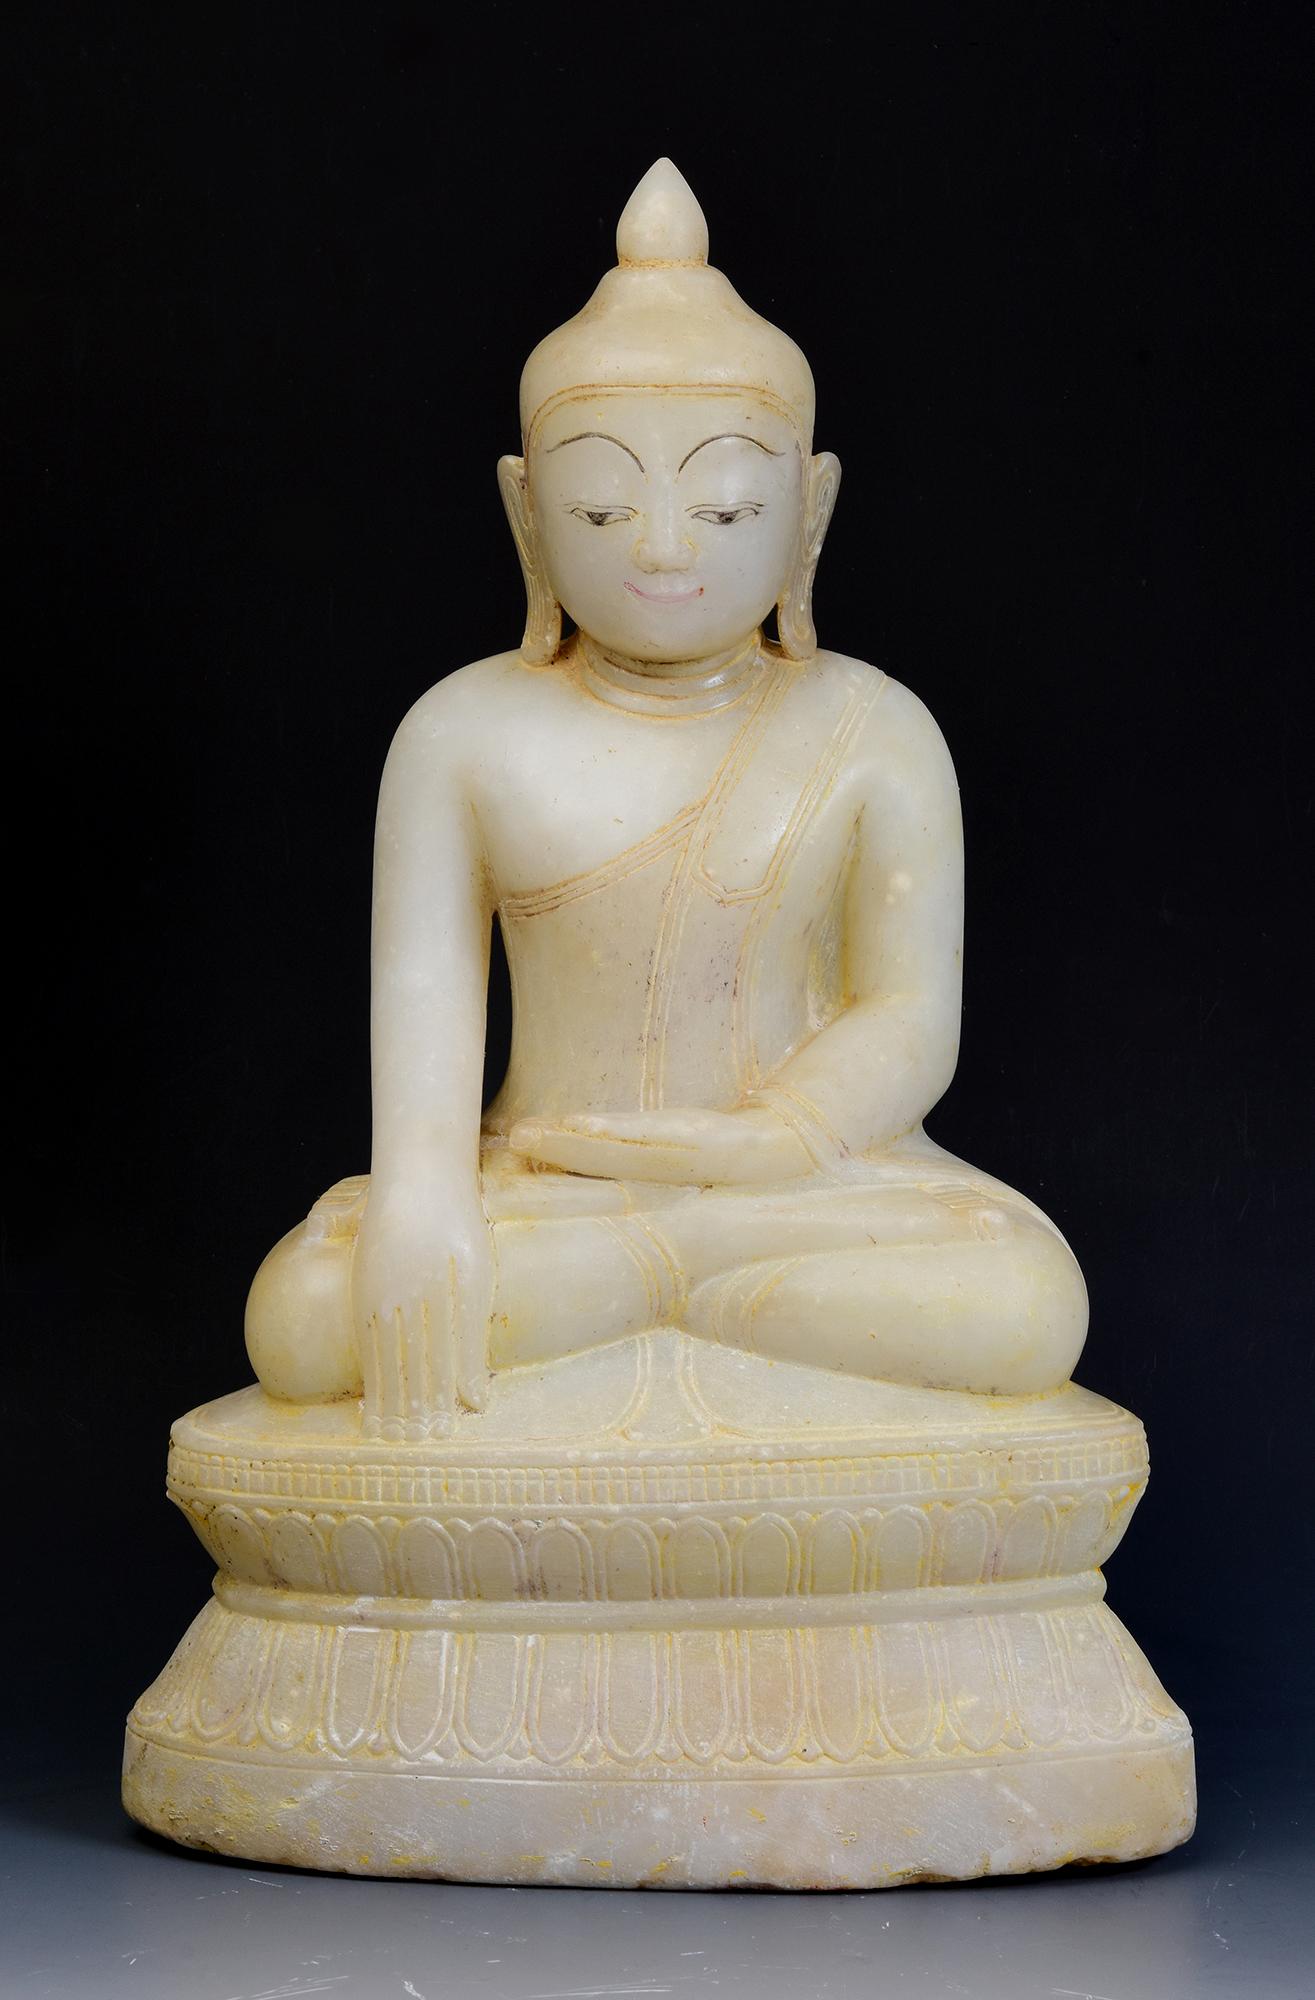 Antique Burmese alabaster Buddha sitting in Mara Vijaya (calling the earth to witness) posture on a base.

Age: Burma, Shan Period, 17th - 18th Century
Size: Height 42.4 C.M. / Width 26.5 C.M. / Depth 16 C.M.
Condition: Nice condition overall (some